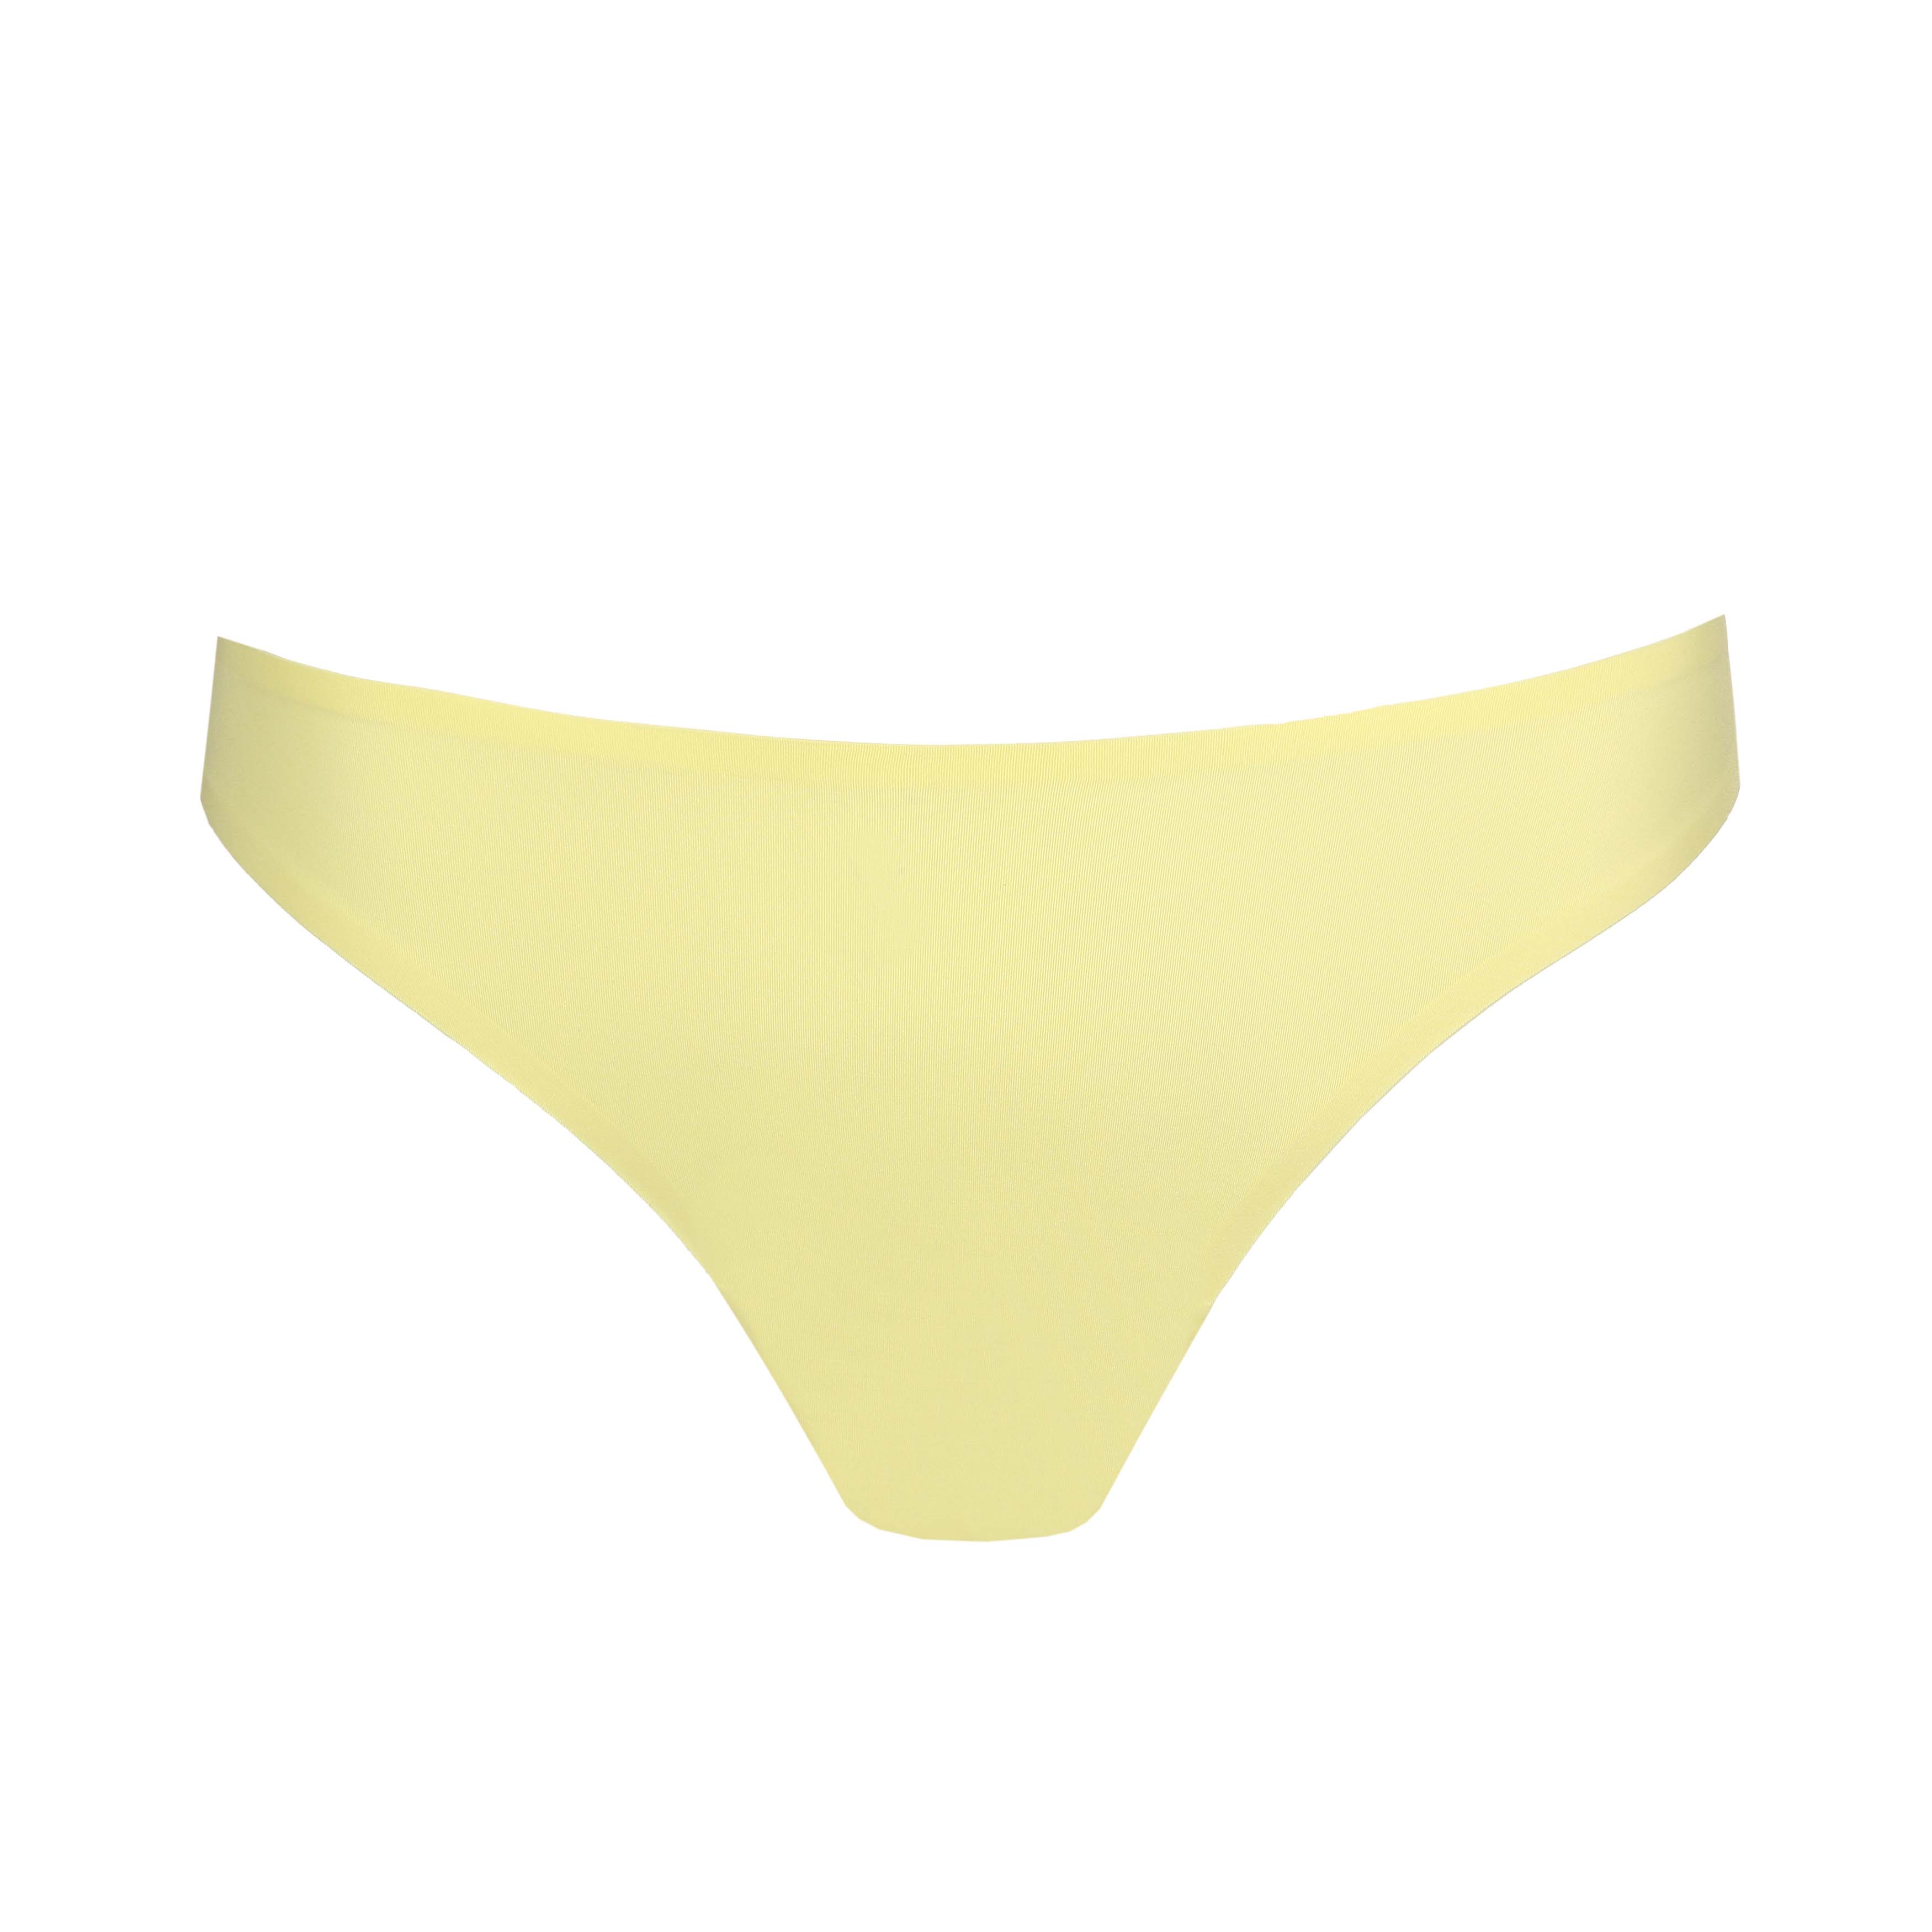 Marie Jo COLOR STUDIO starlight thong | Rigby & Peller United States